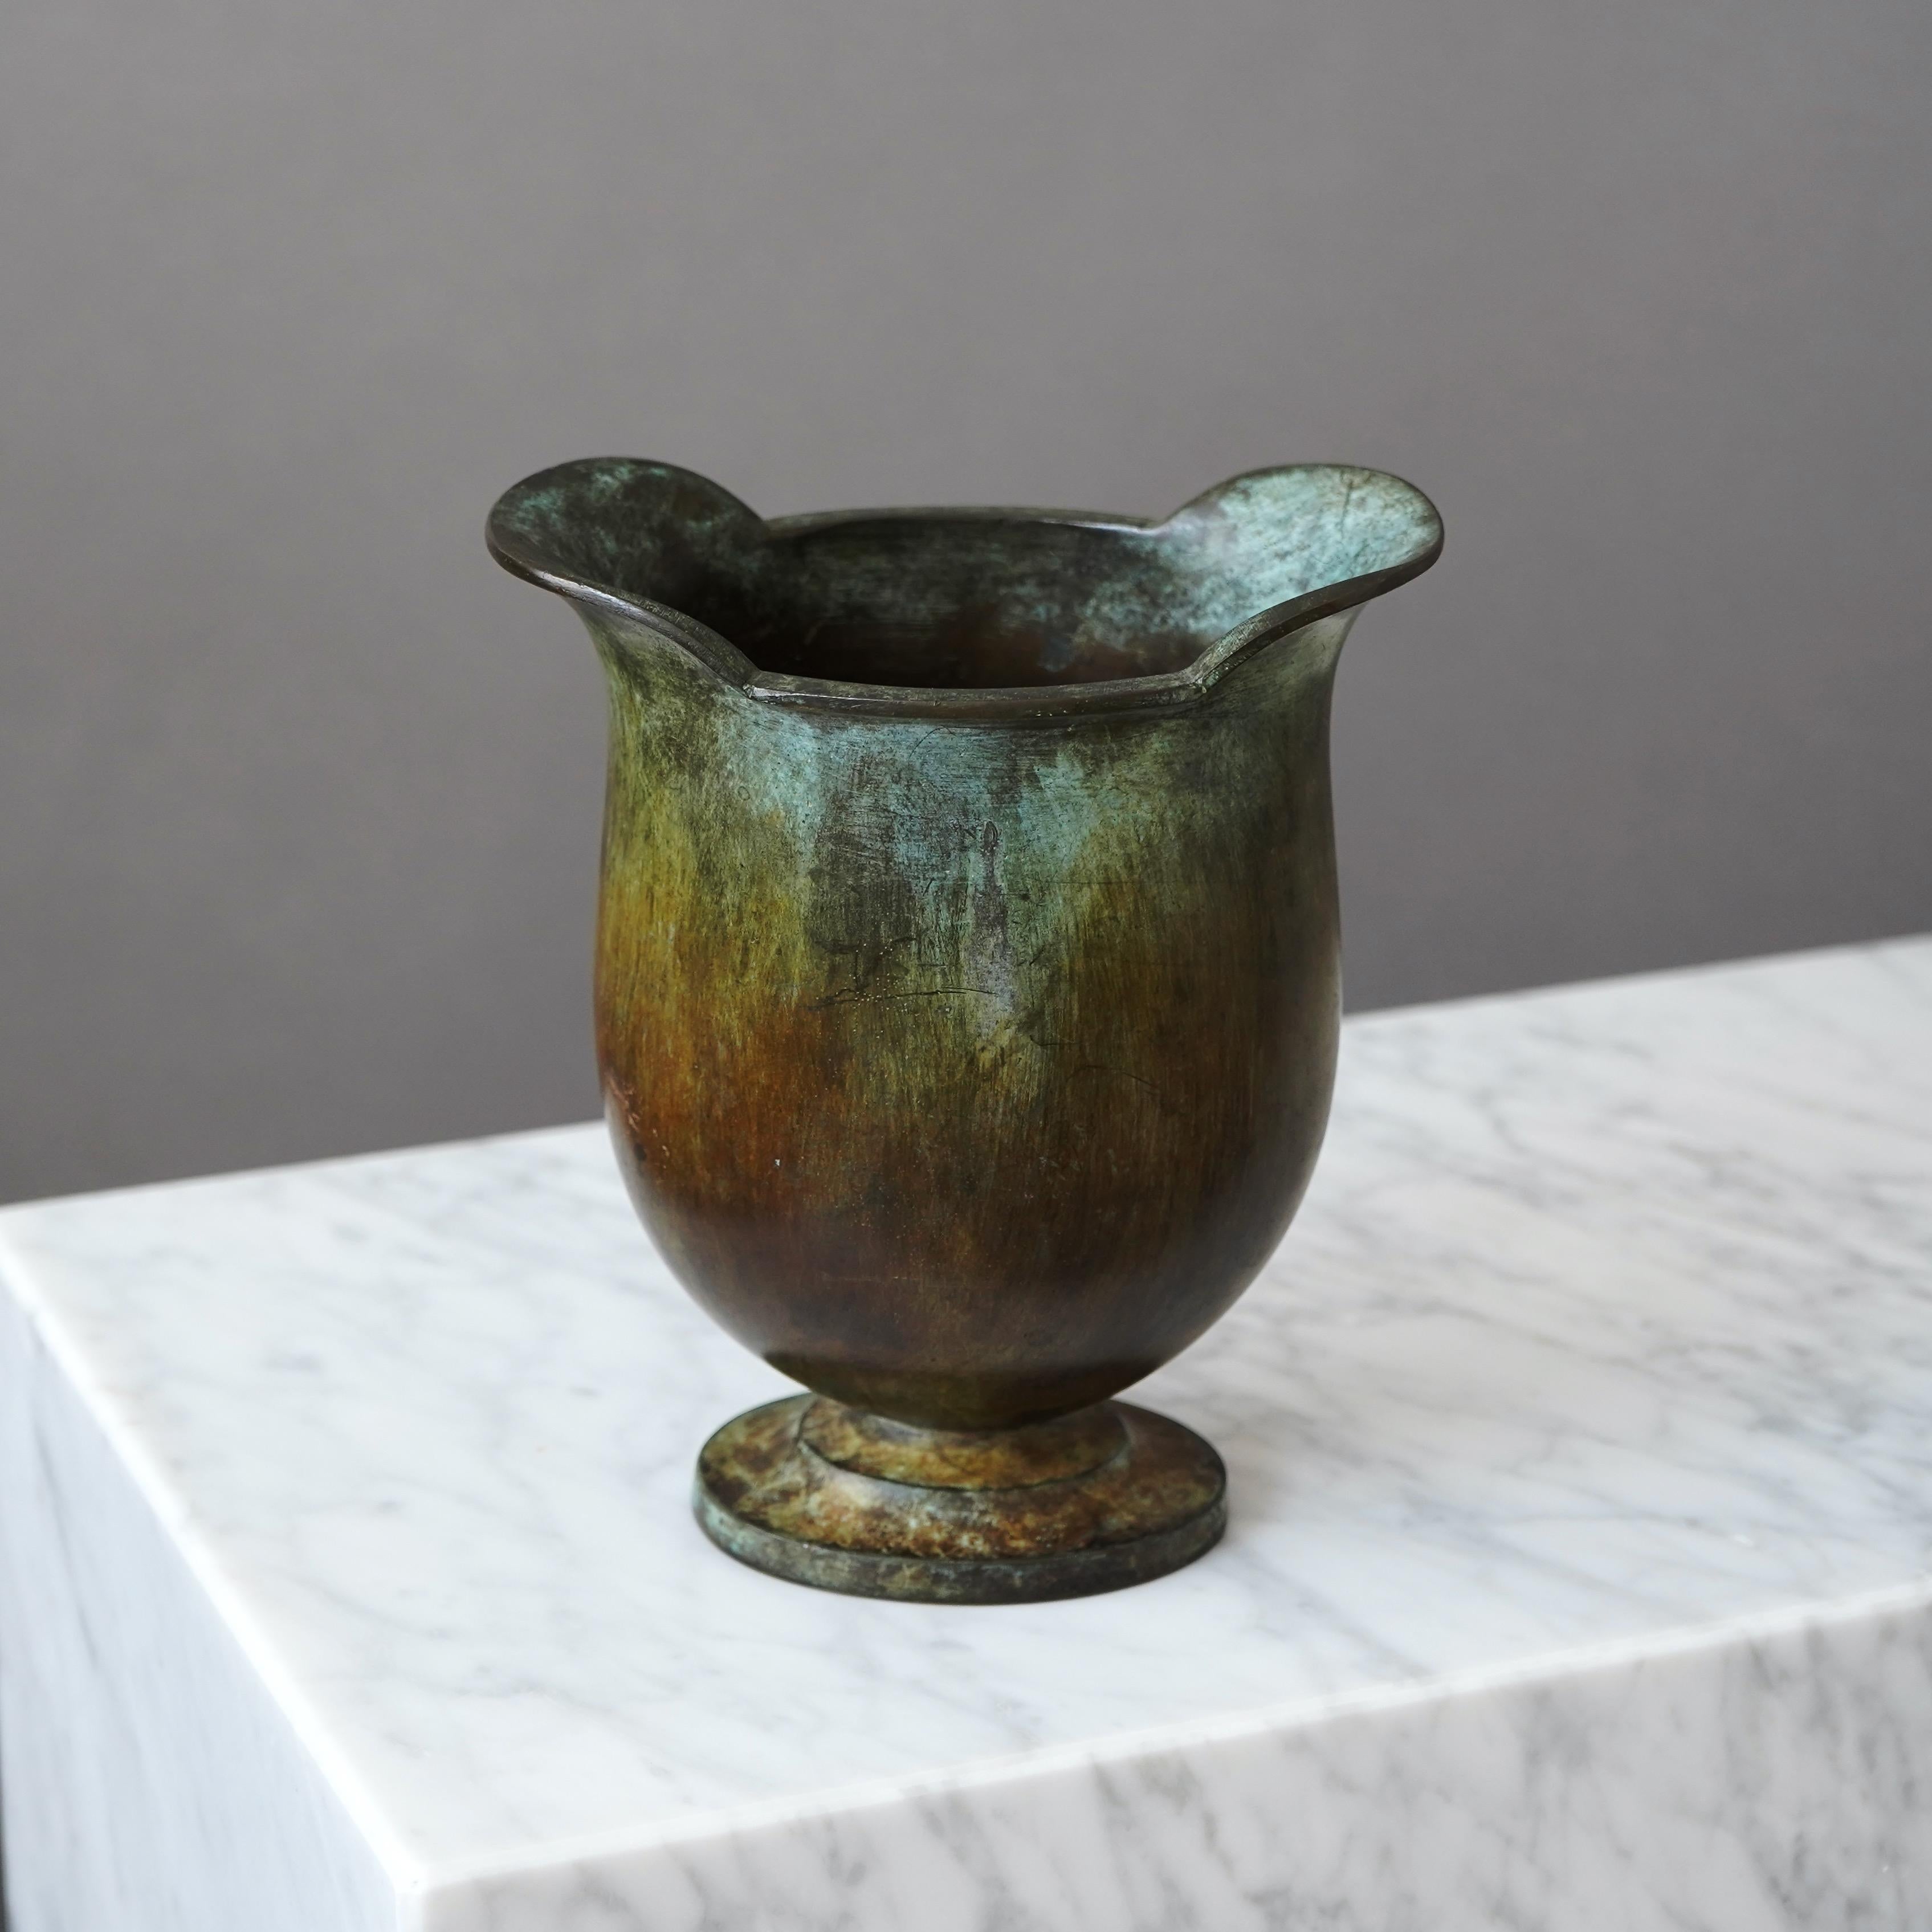 A beautiful bronze vase with amazing patina. Art Deco / Swedish Grace. 
Made by GAB Guldsmedsaktiebolaget, Sweden, 1930s.  

Great condition, with a few light scratches.
Stamped 'BRONS' and makers mark.
